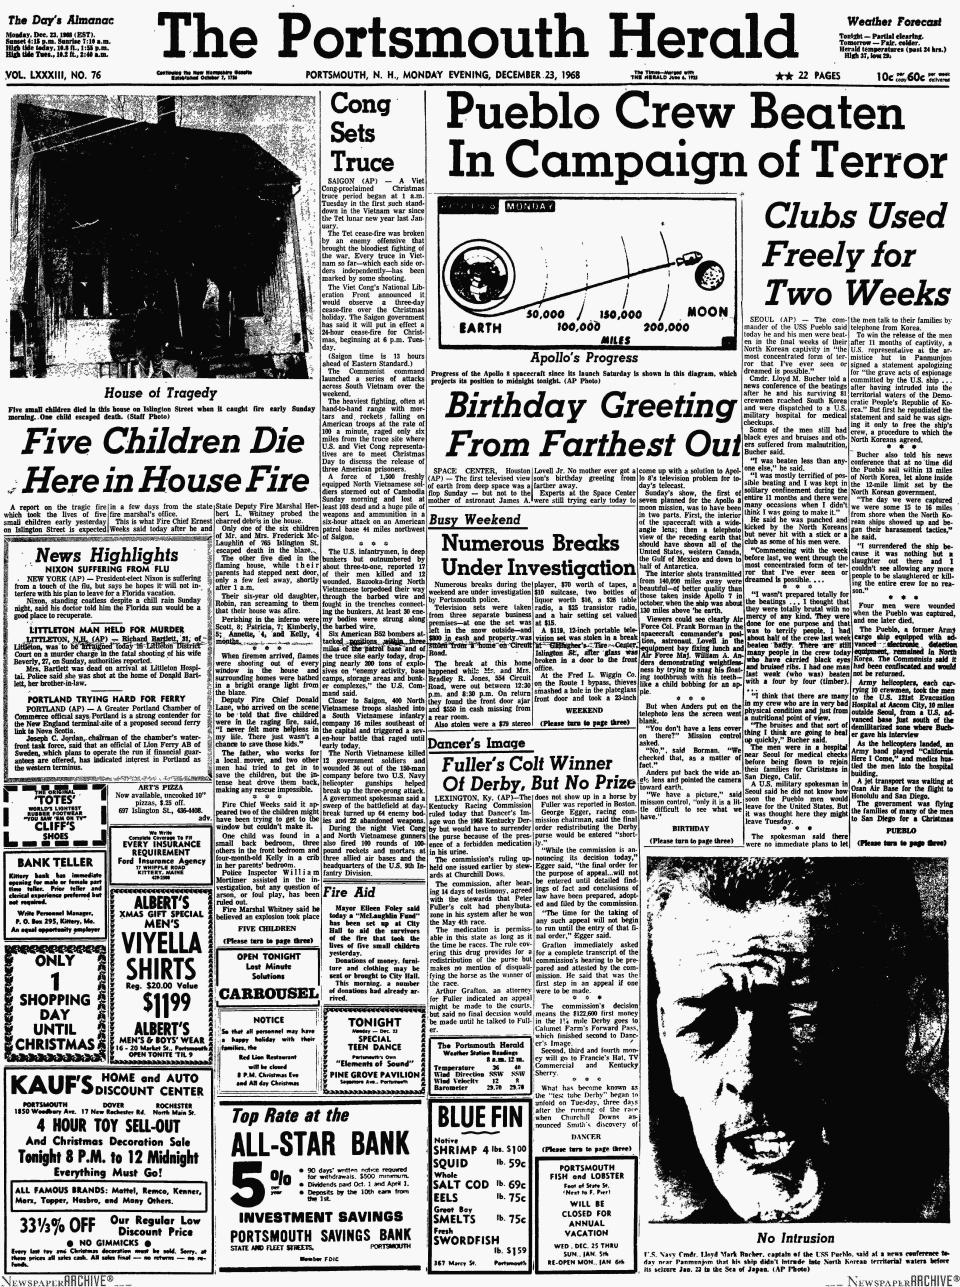 The deaths of five McLaughlin children were reported on page 1 in the Dec. 23, 1968 Portsmouth Herald. Deputy Fire Chief Donald Lane told the newspaper that he "never felt more helpless in my life" when firefighters arrived at the burning home on Islington Street and realized the children couldn't be rescued.